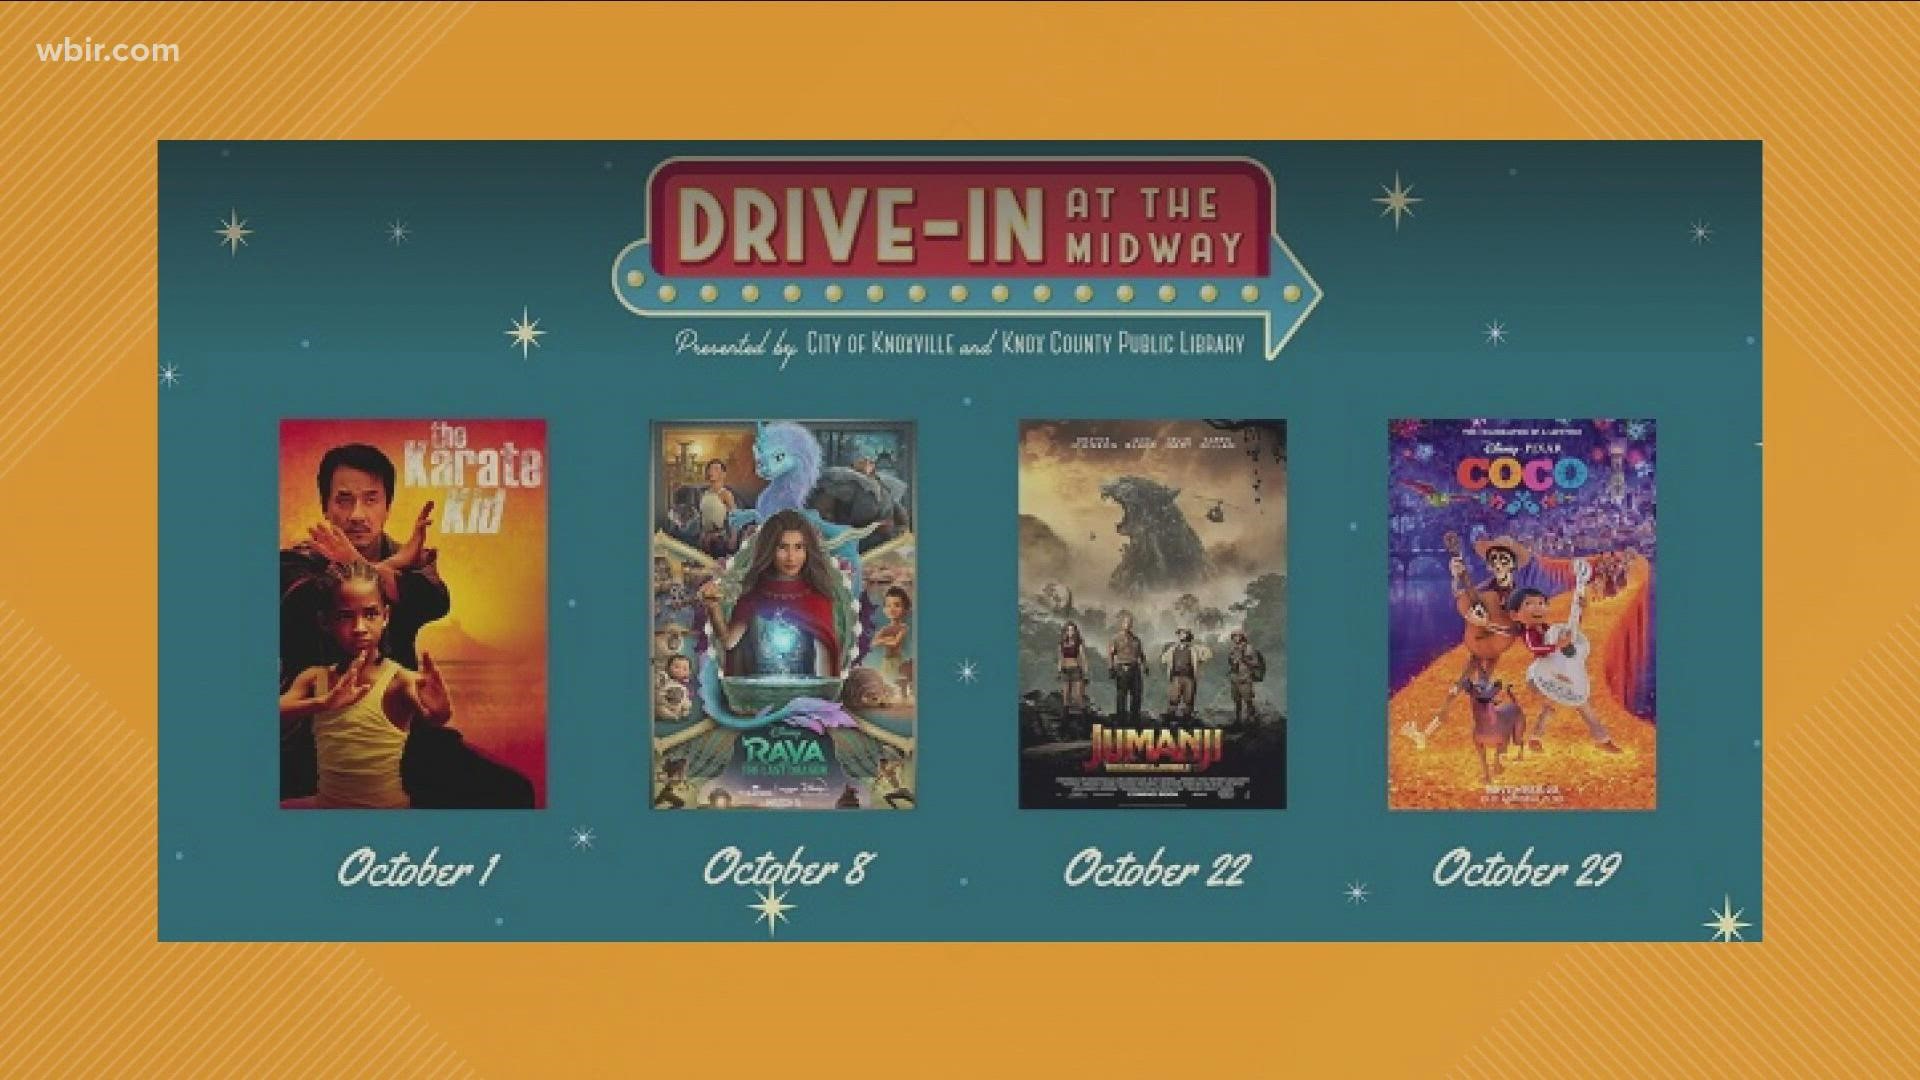 The Knox County Library announces the 4 movies to be shown at Chilhowee park Fridays in October (excluding Oct. 22). Sept 17, 2021-4pm.